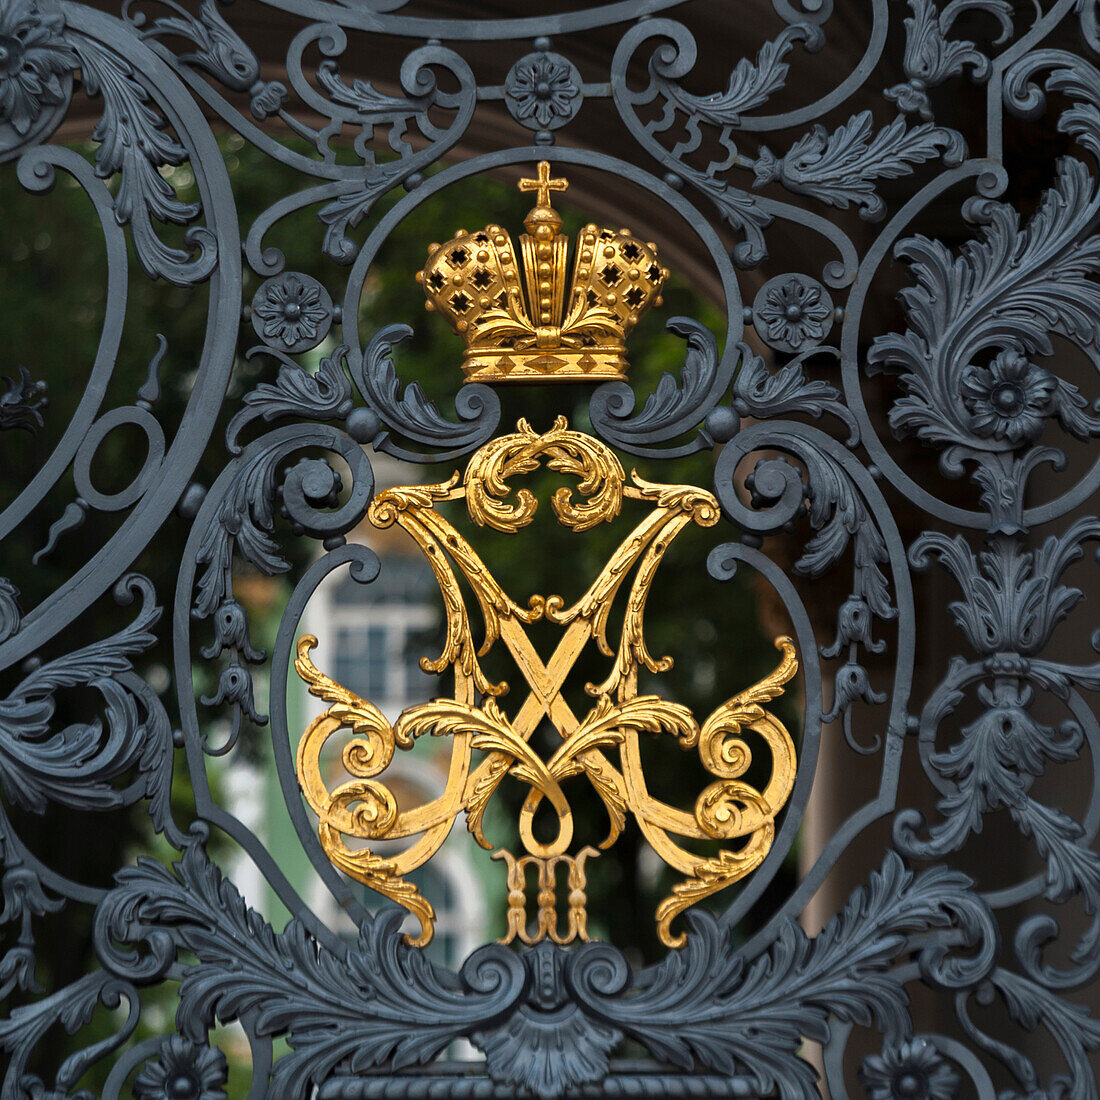 'Gold Crown And Black Metal Design On The Gate To Winter Palace; St. Petersburg, Russia'